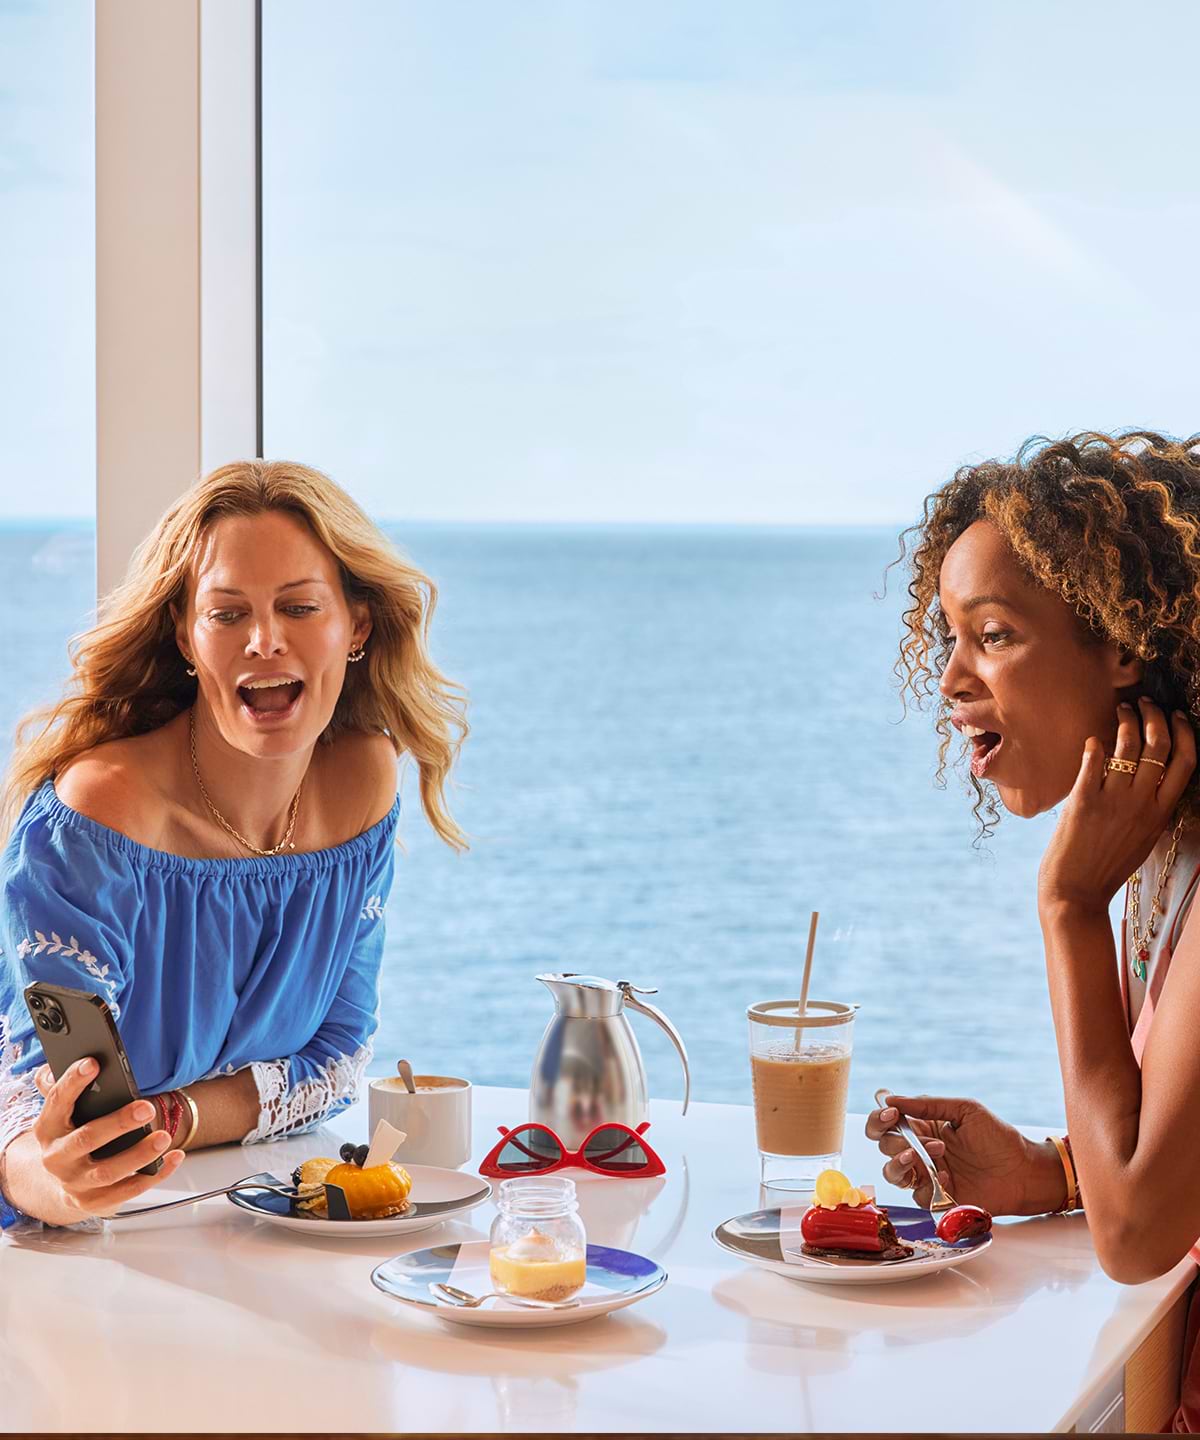 women at dinner table reacting to phone with ocean view in the background